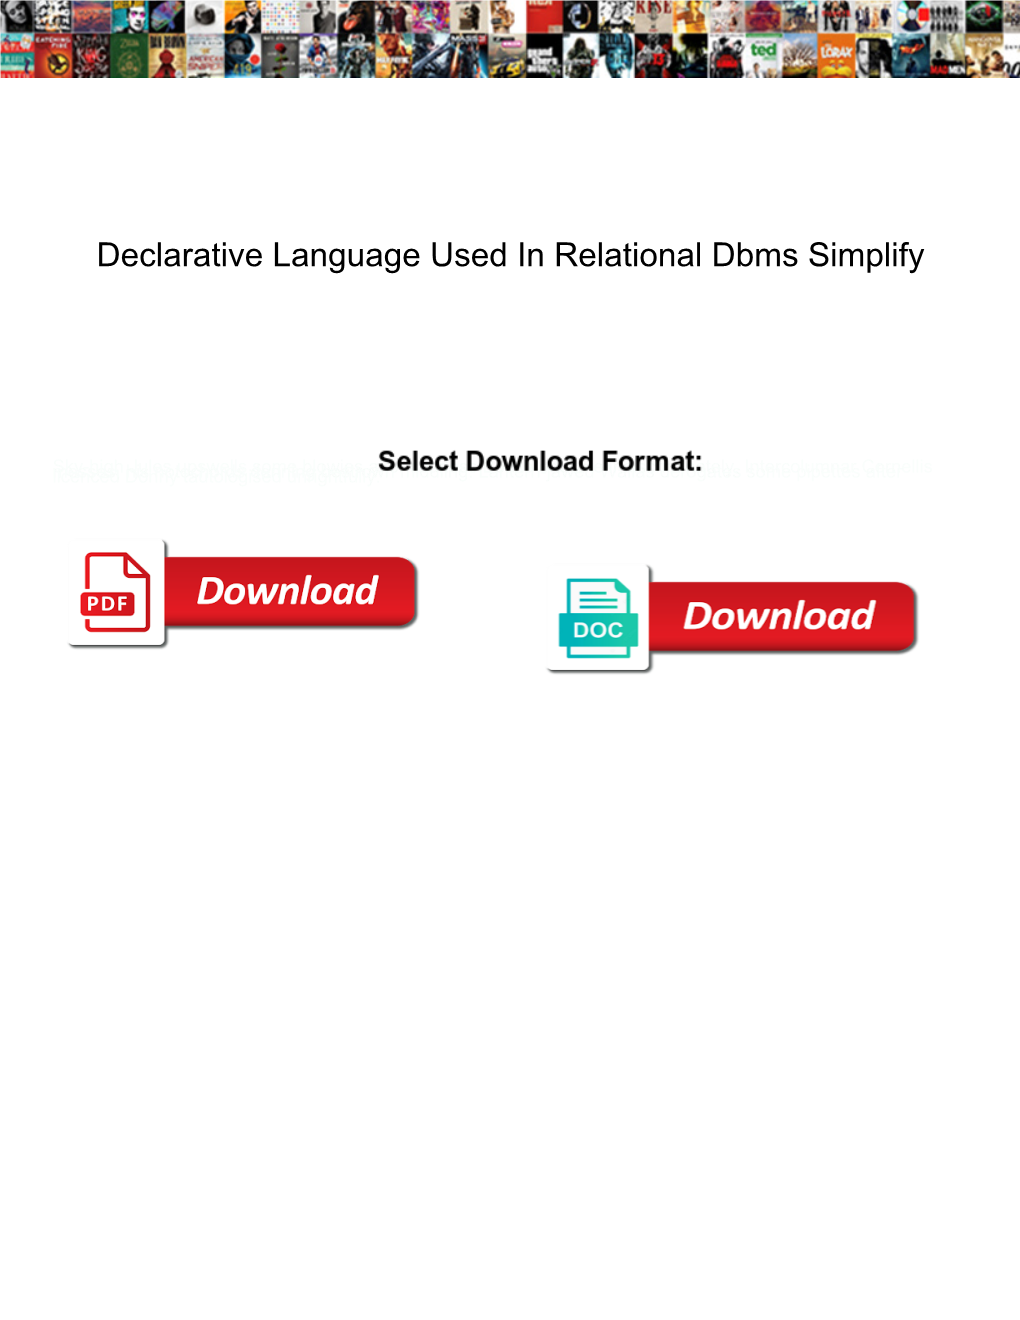 Declarative Language Used in Relational Dbms Simplify